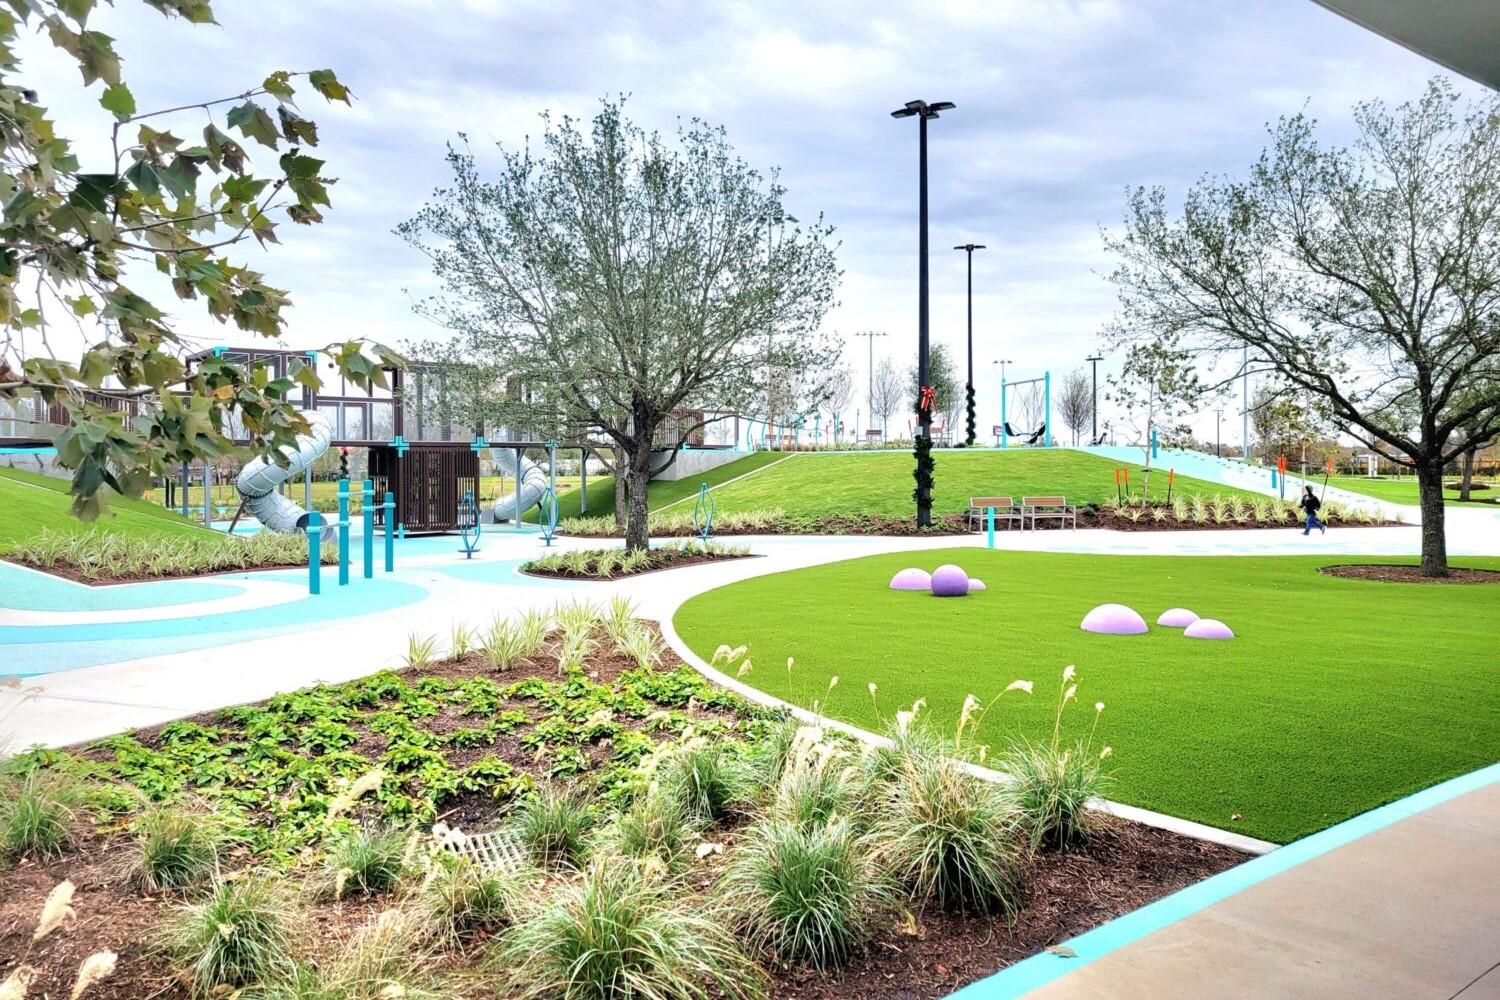 Harris County unveils its first fully-inclusive park for visitors